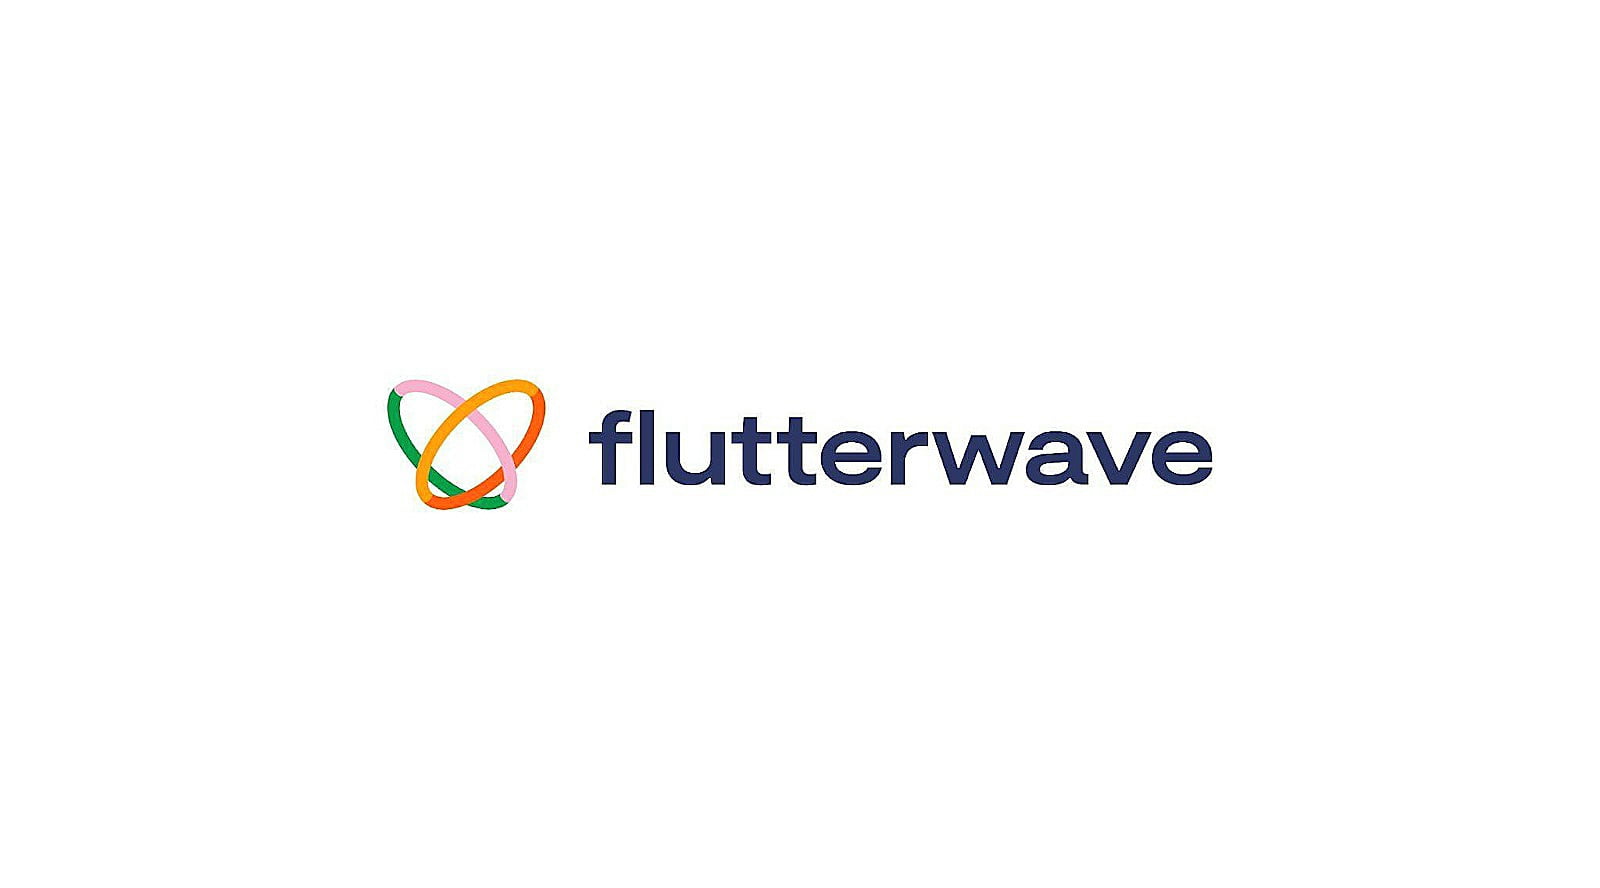 Flutterwave Denies Security Breach, Assures Customers Their Accounts Are Safe